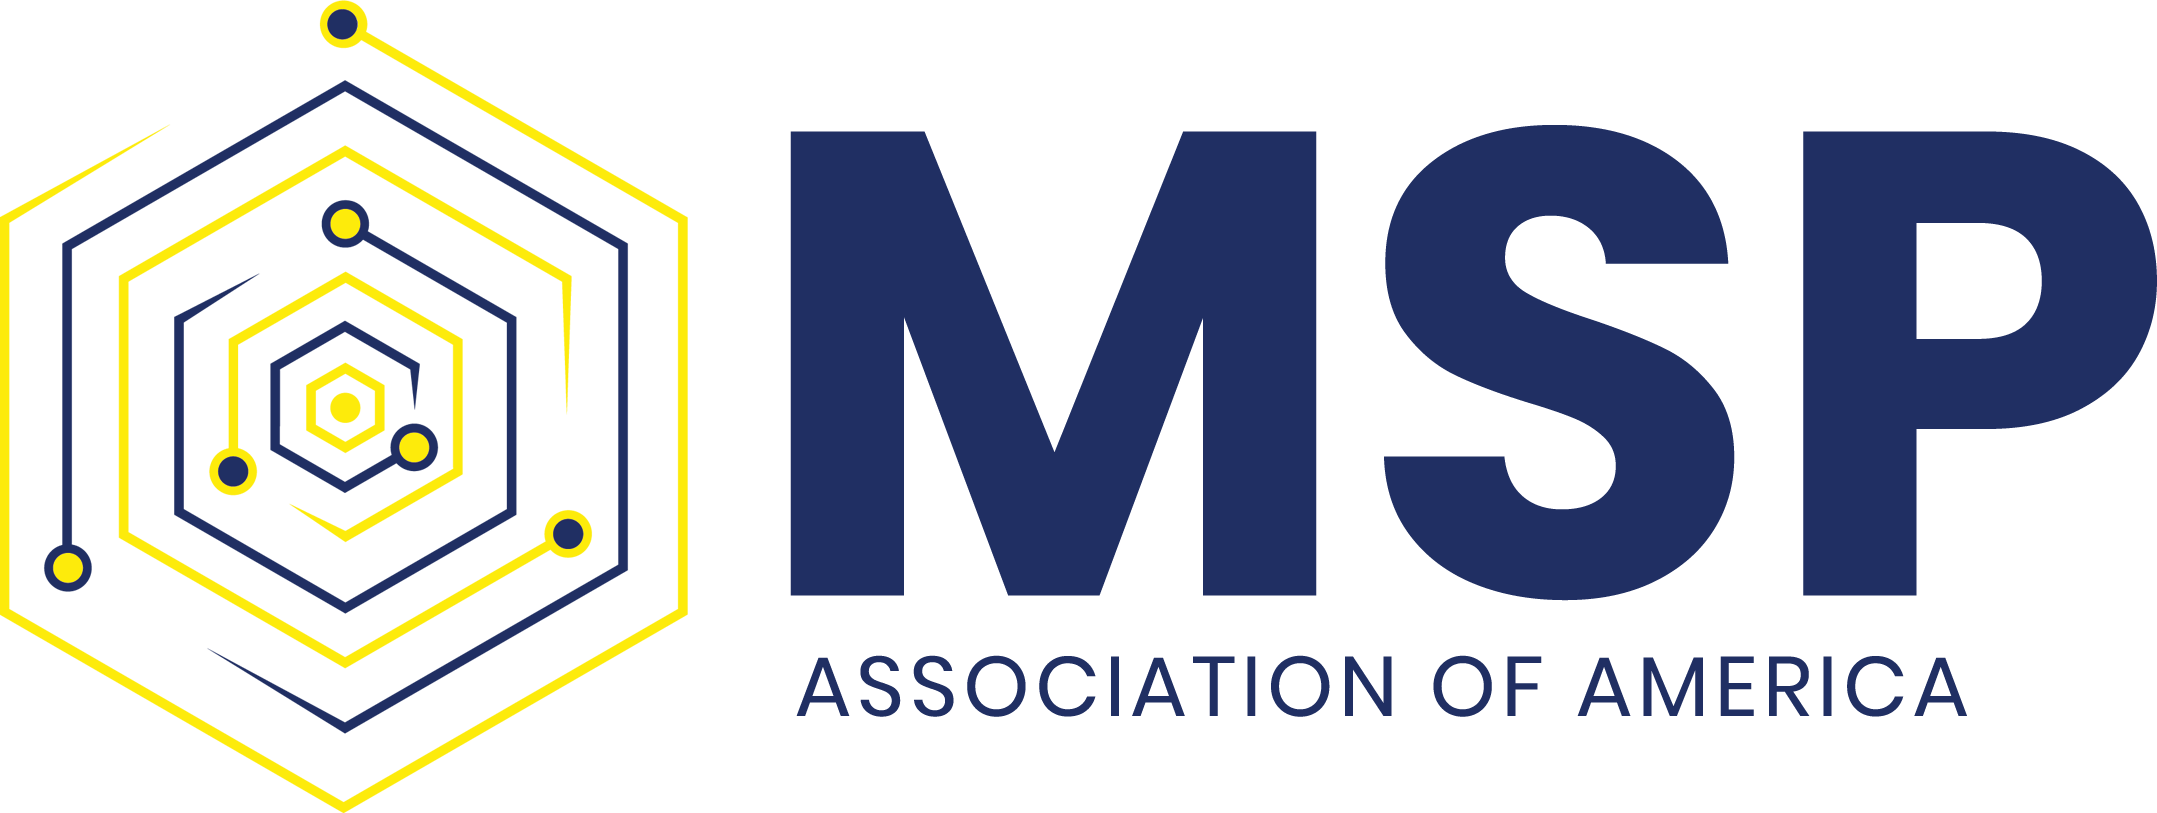 All Events | MSP Association of America